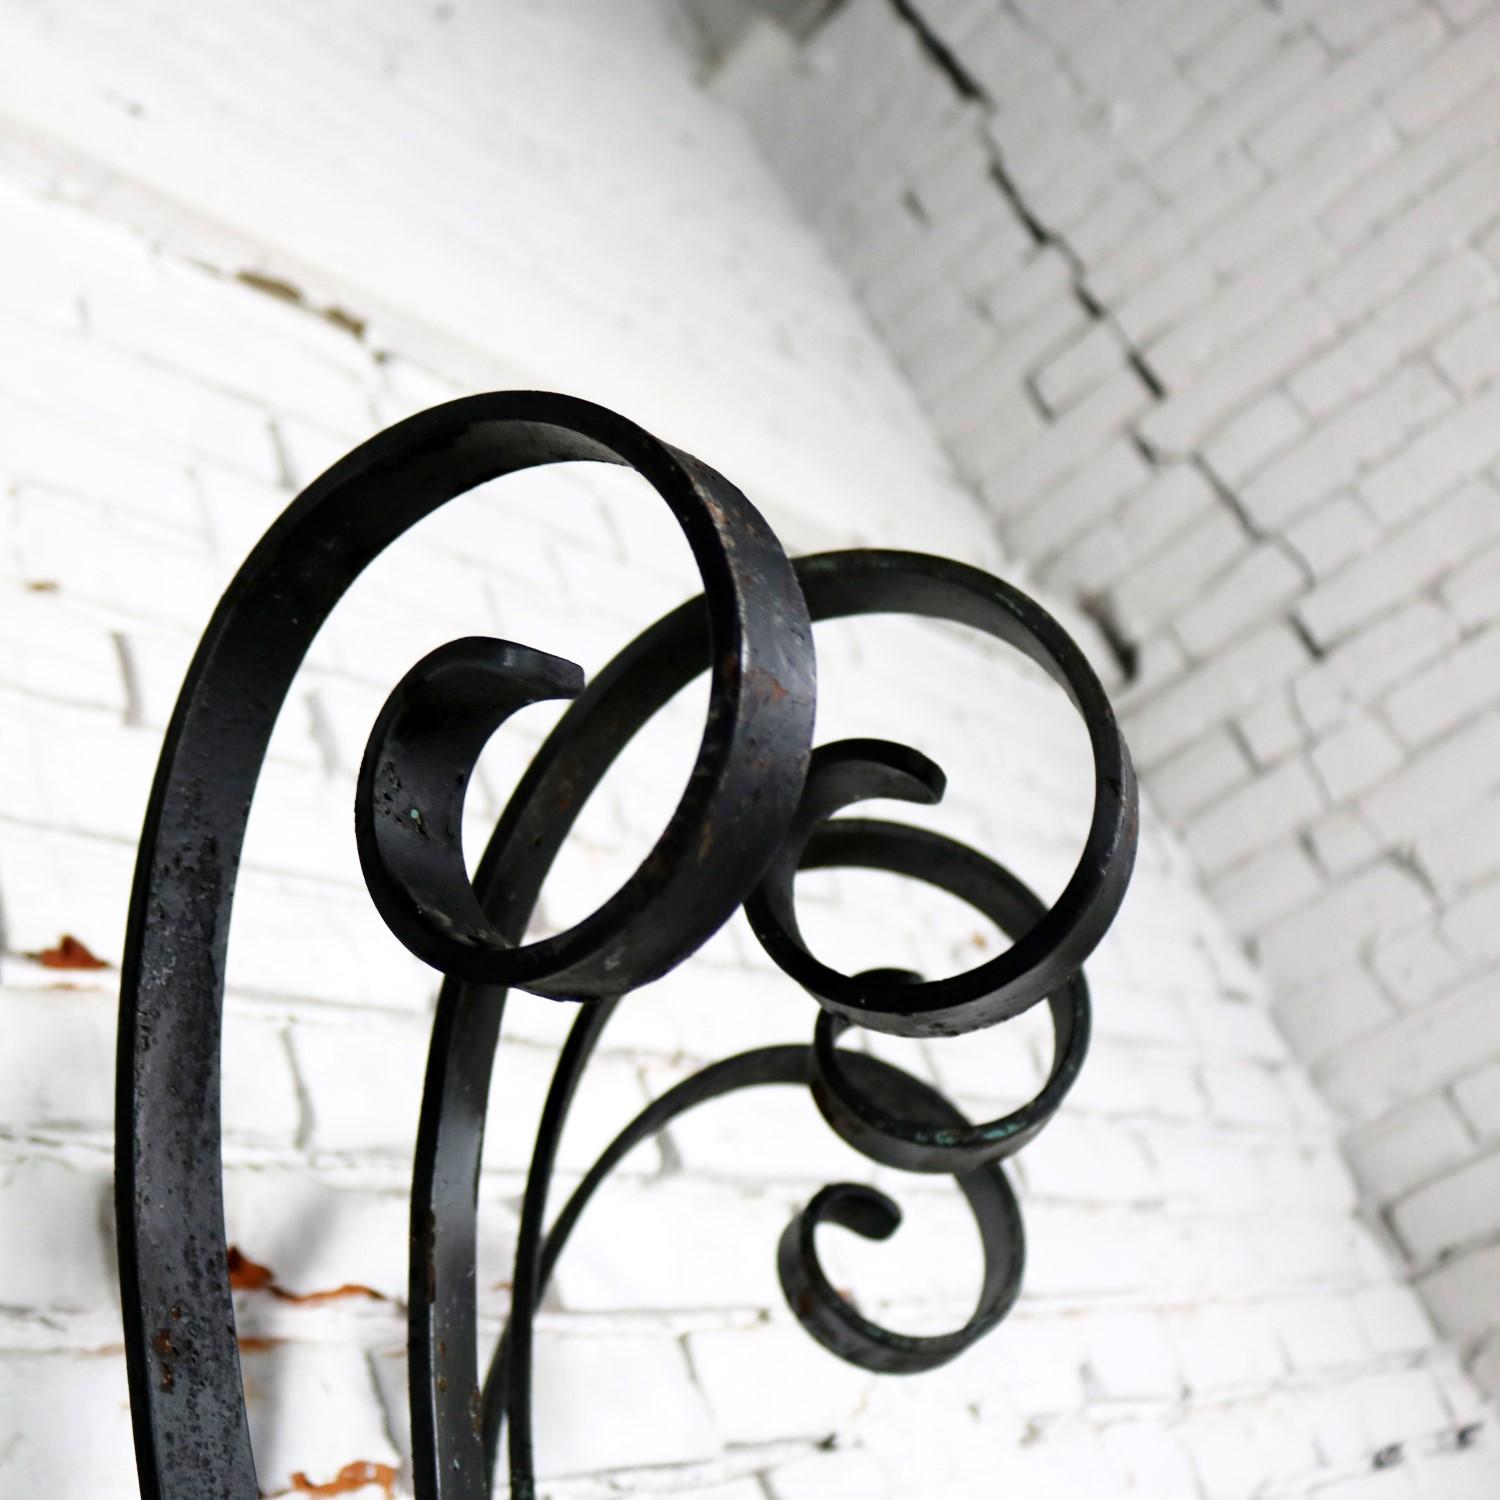 Architectural Antique Window Guards or Wall Urn Planters Hand-Wrought Iron 1